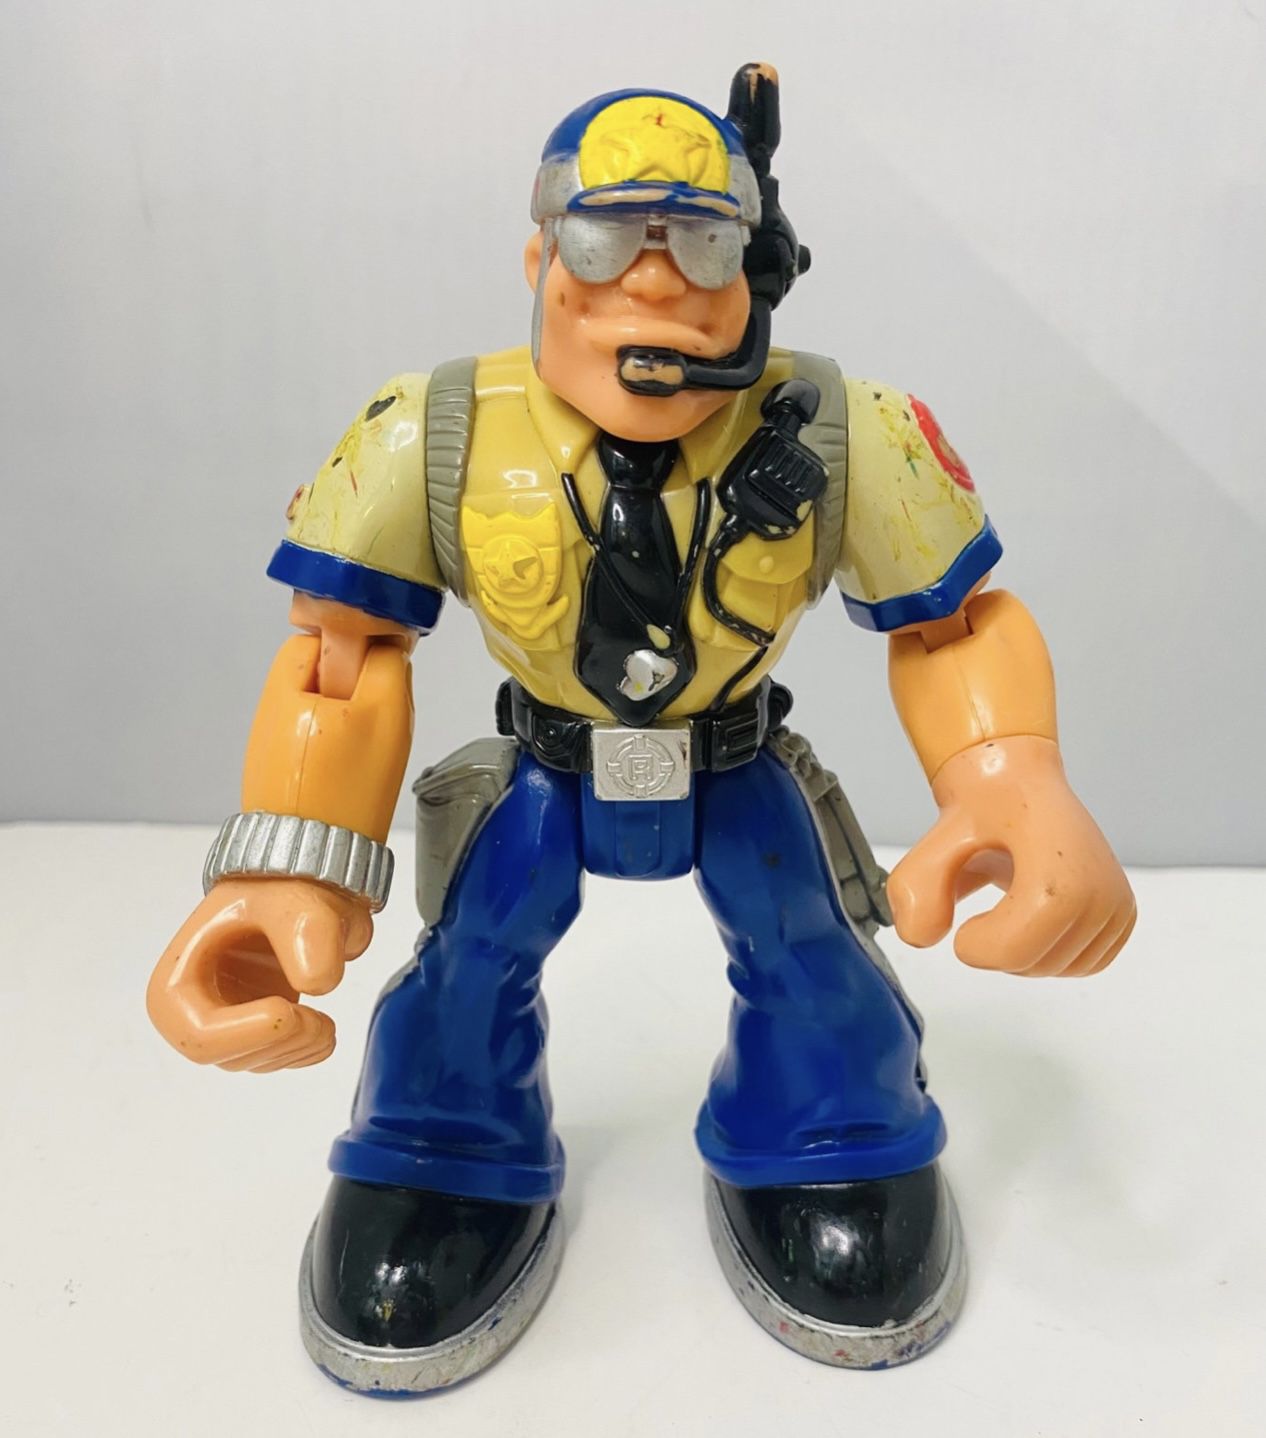 Rescue Heroes Sergeant Siren Police Fisher Price Vintage Action Figure